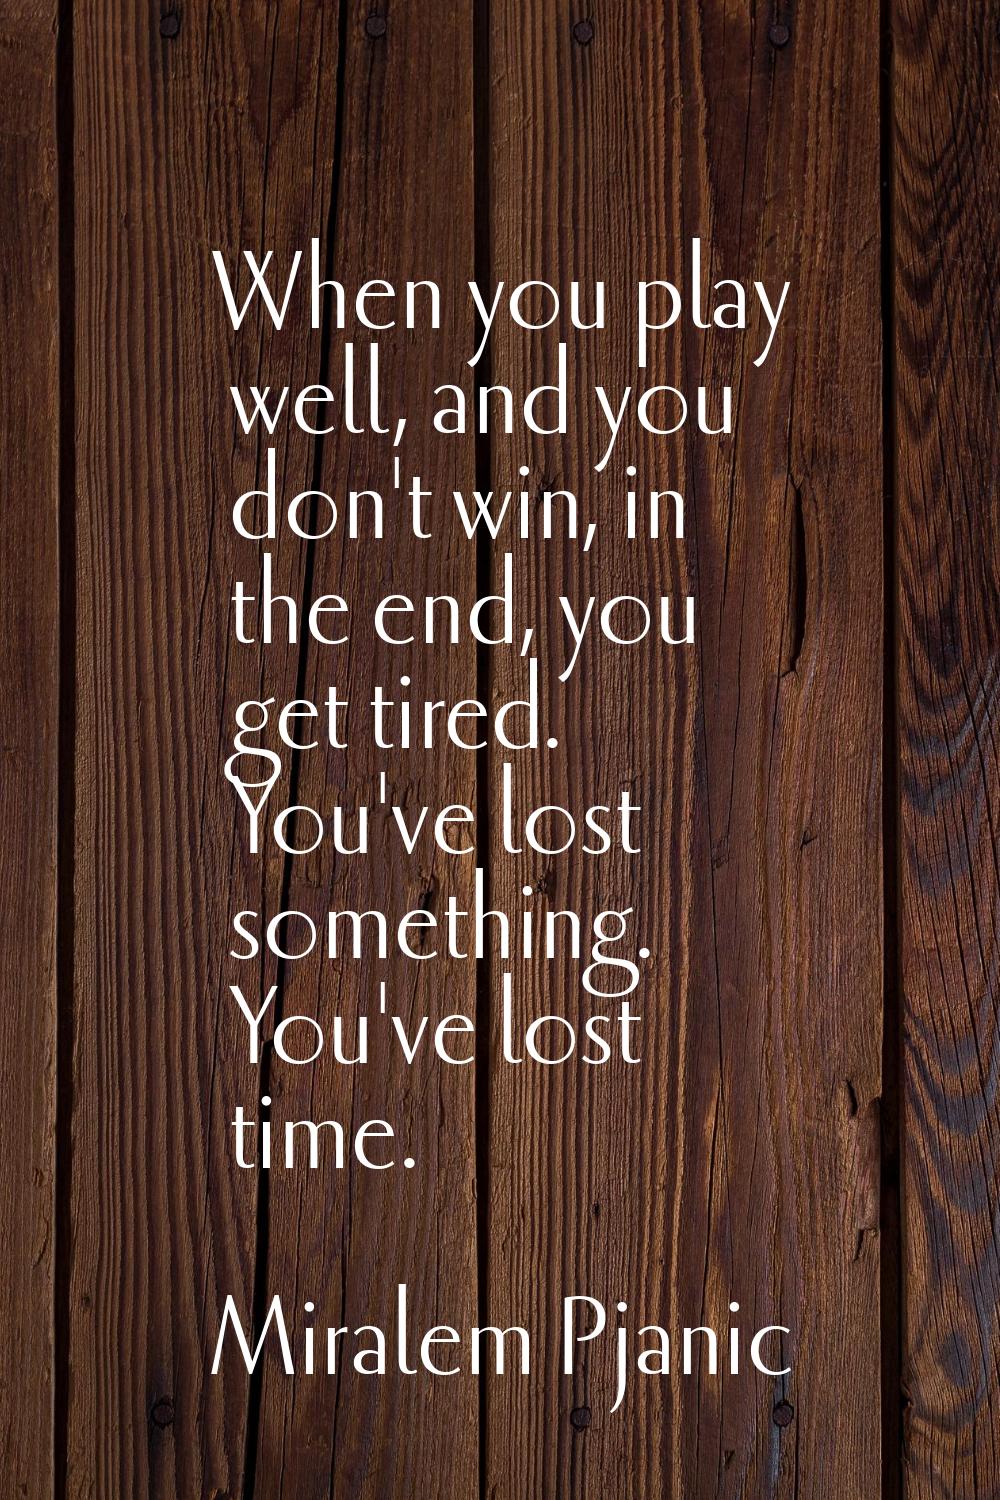 When you play well, and you don't win, in the end, you get tired. You've lost something. You've los